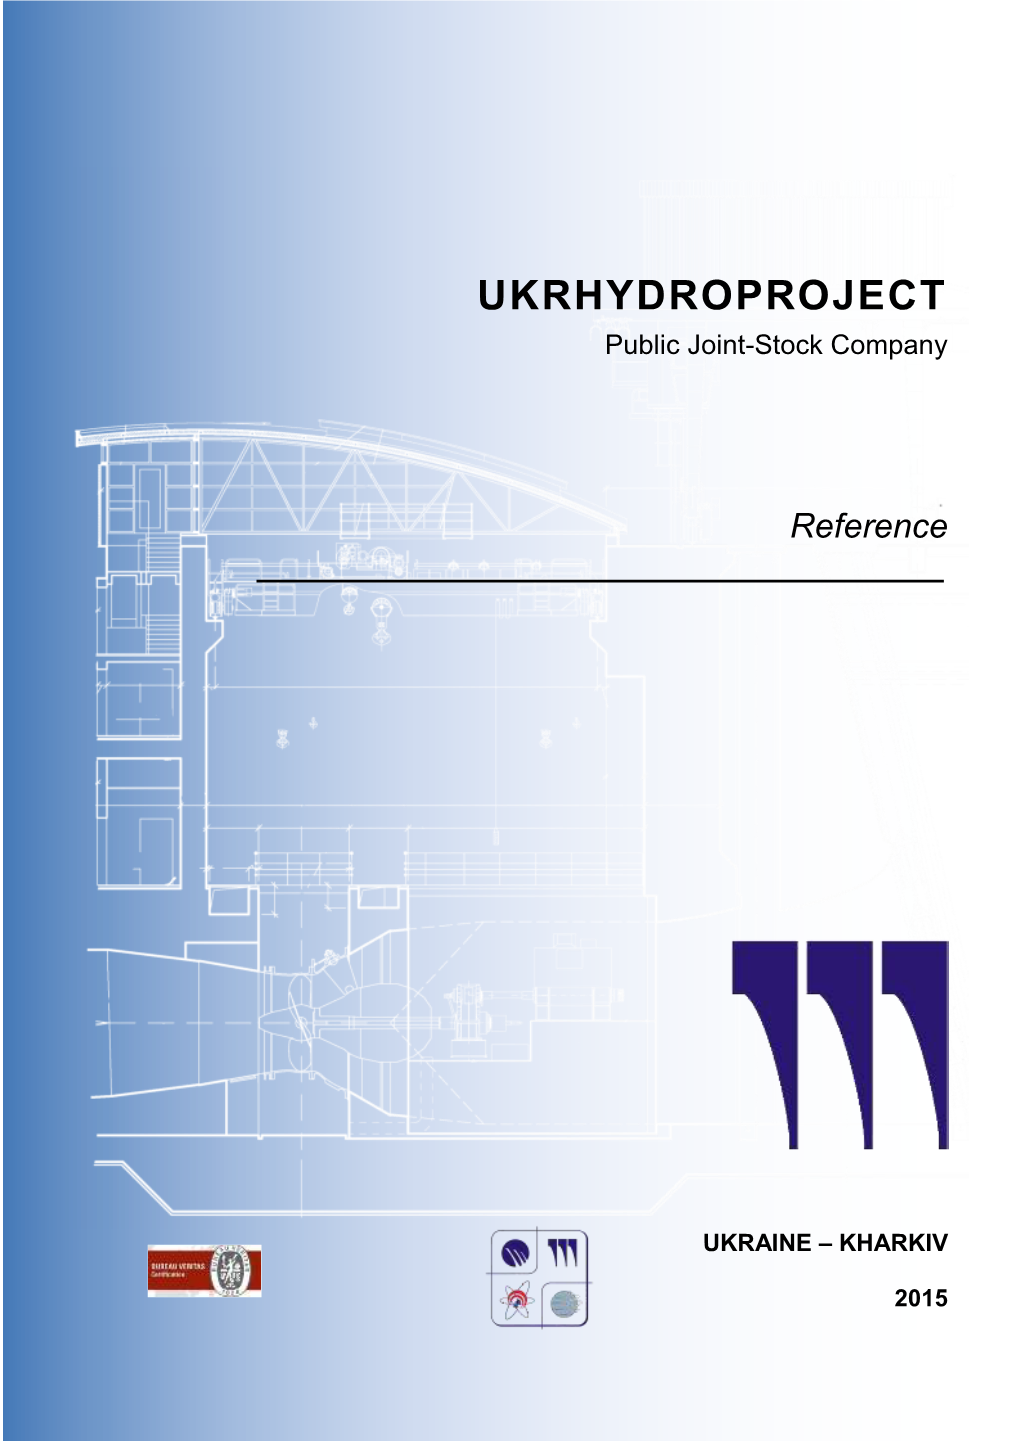 UKRHYDROPROJECT Public Joint-Stock Company